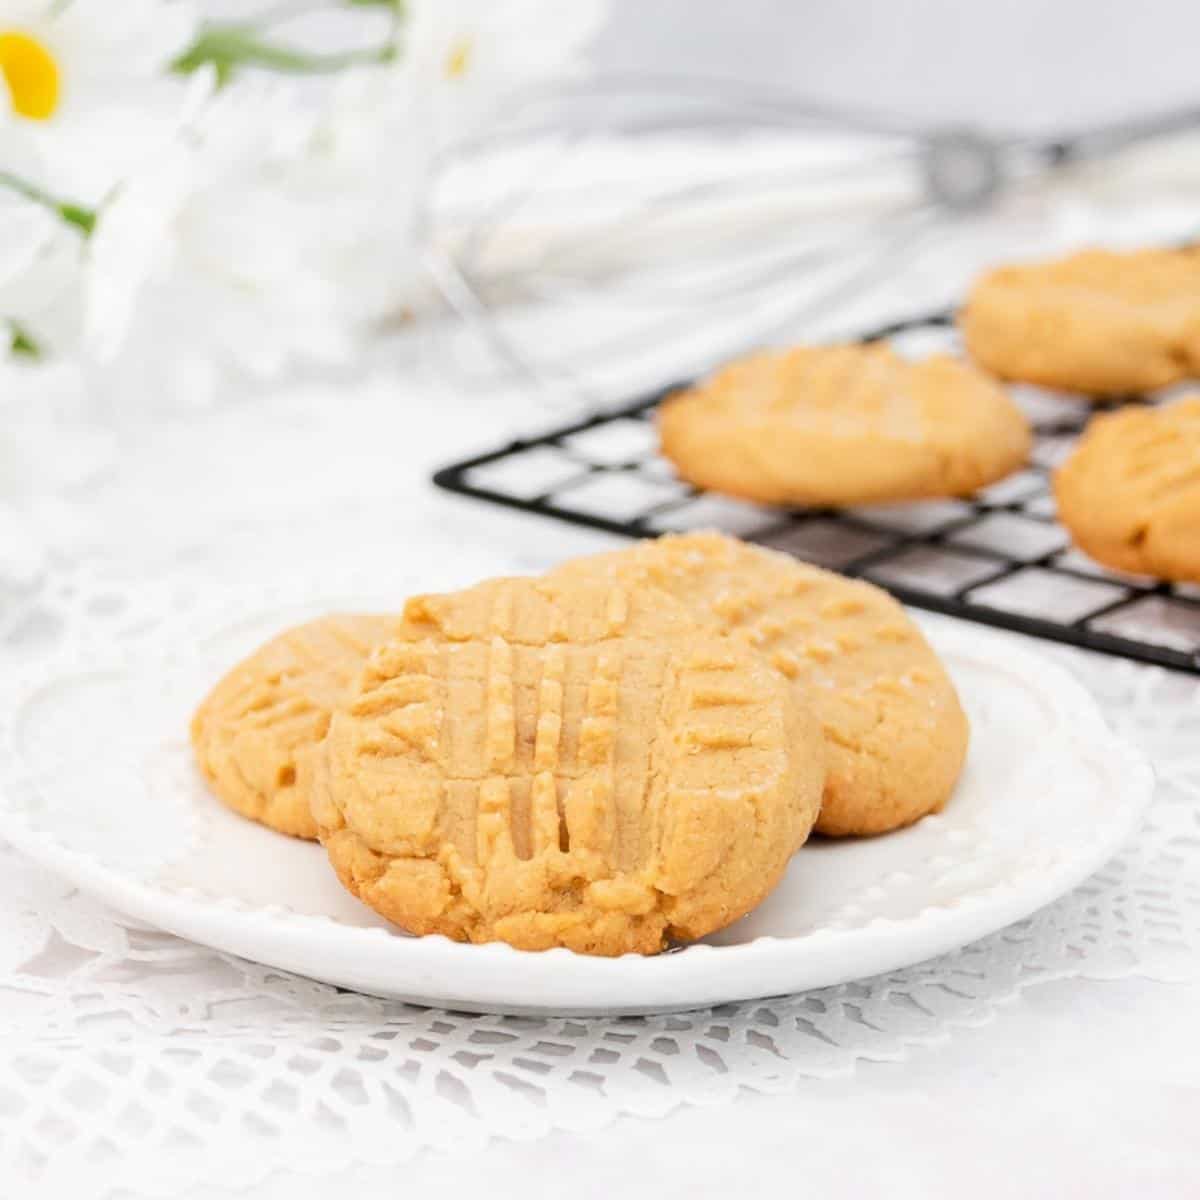 Three peanut butter cookies on a white plate featured image.